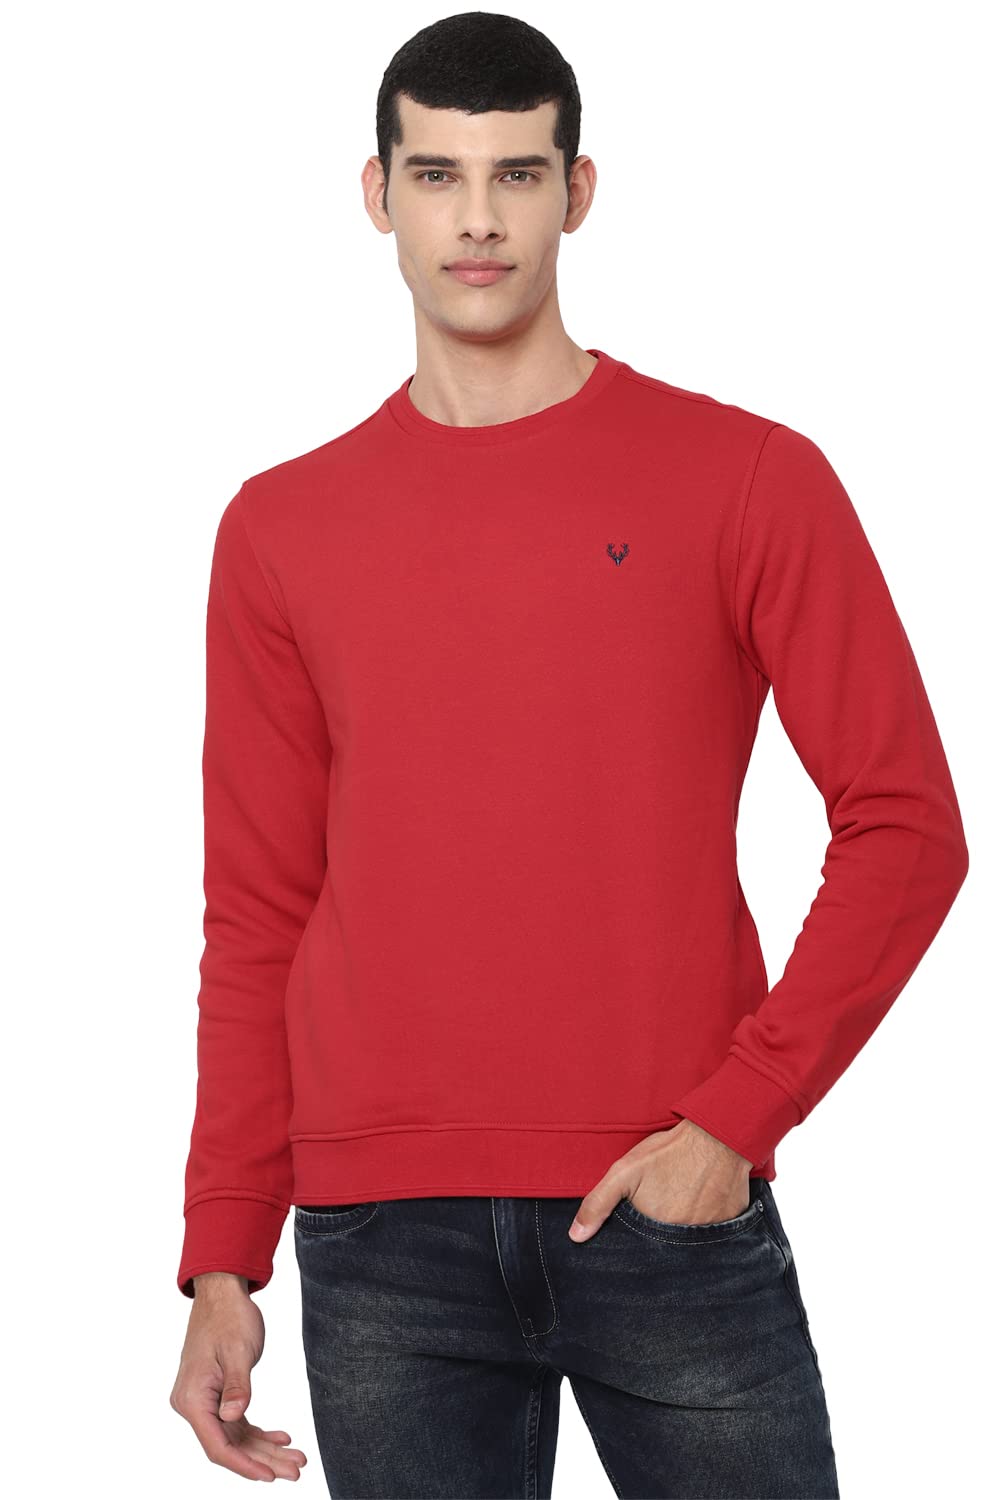 Allen Solly Solid Cotton Regular Mens Sweatshirt (A21STCRGF292380004,RED,Extra Large) 